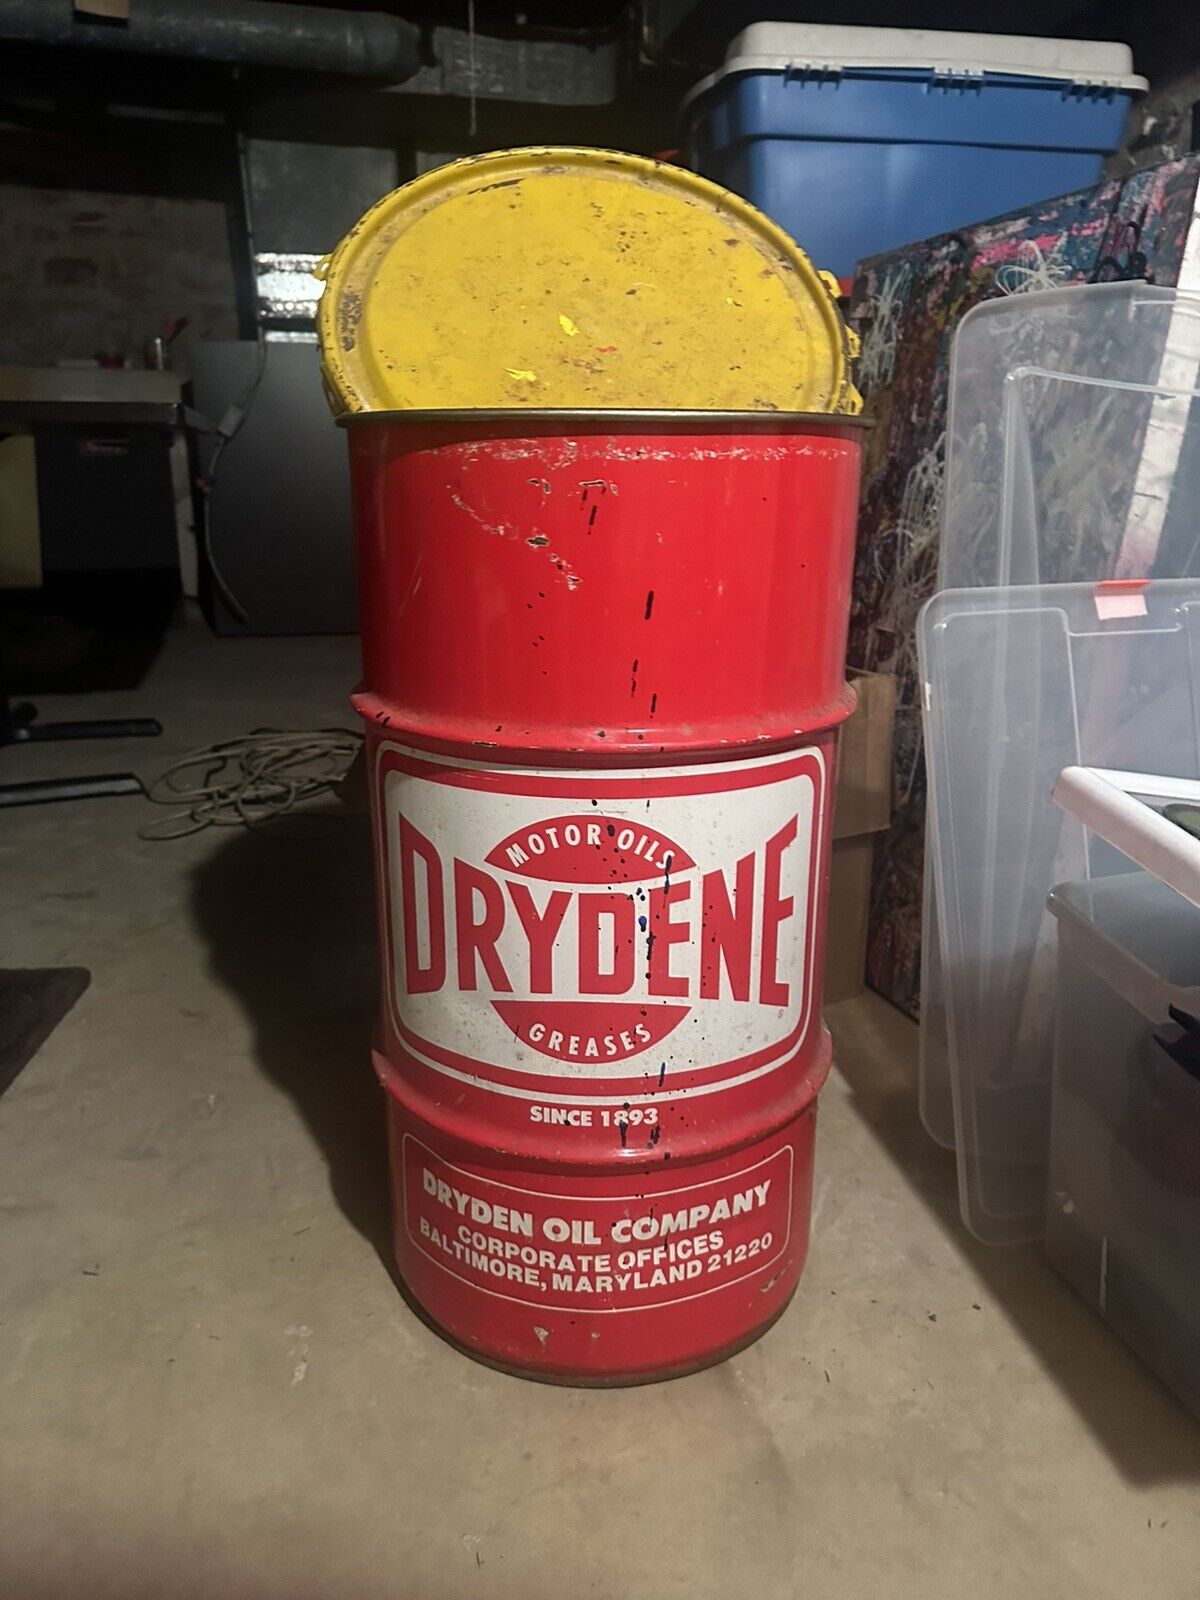 Drydene Motor Oils Greases Empty Oil Drum 16 US Gallons